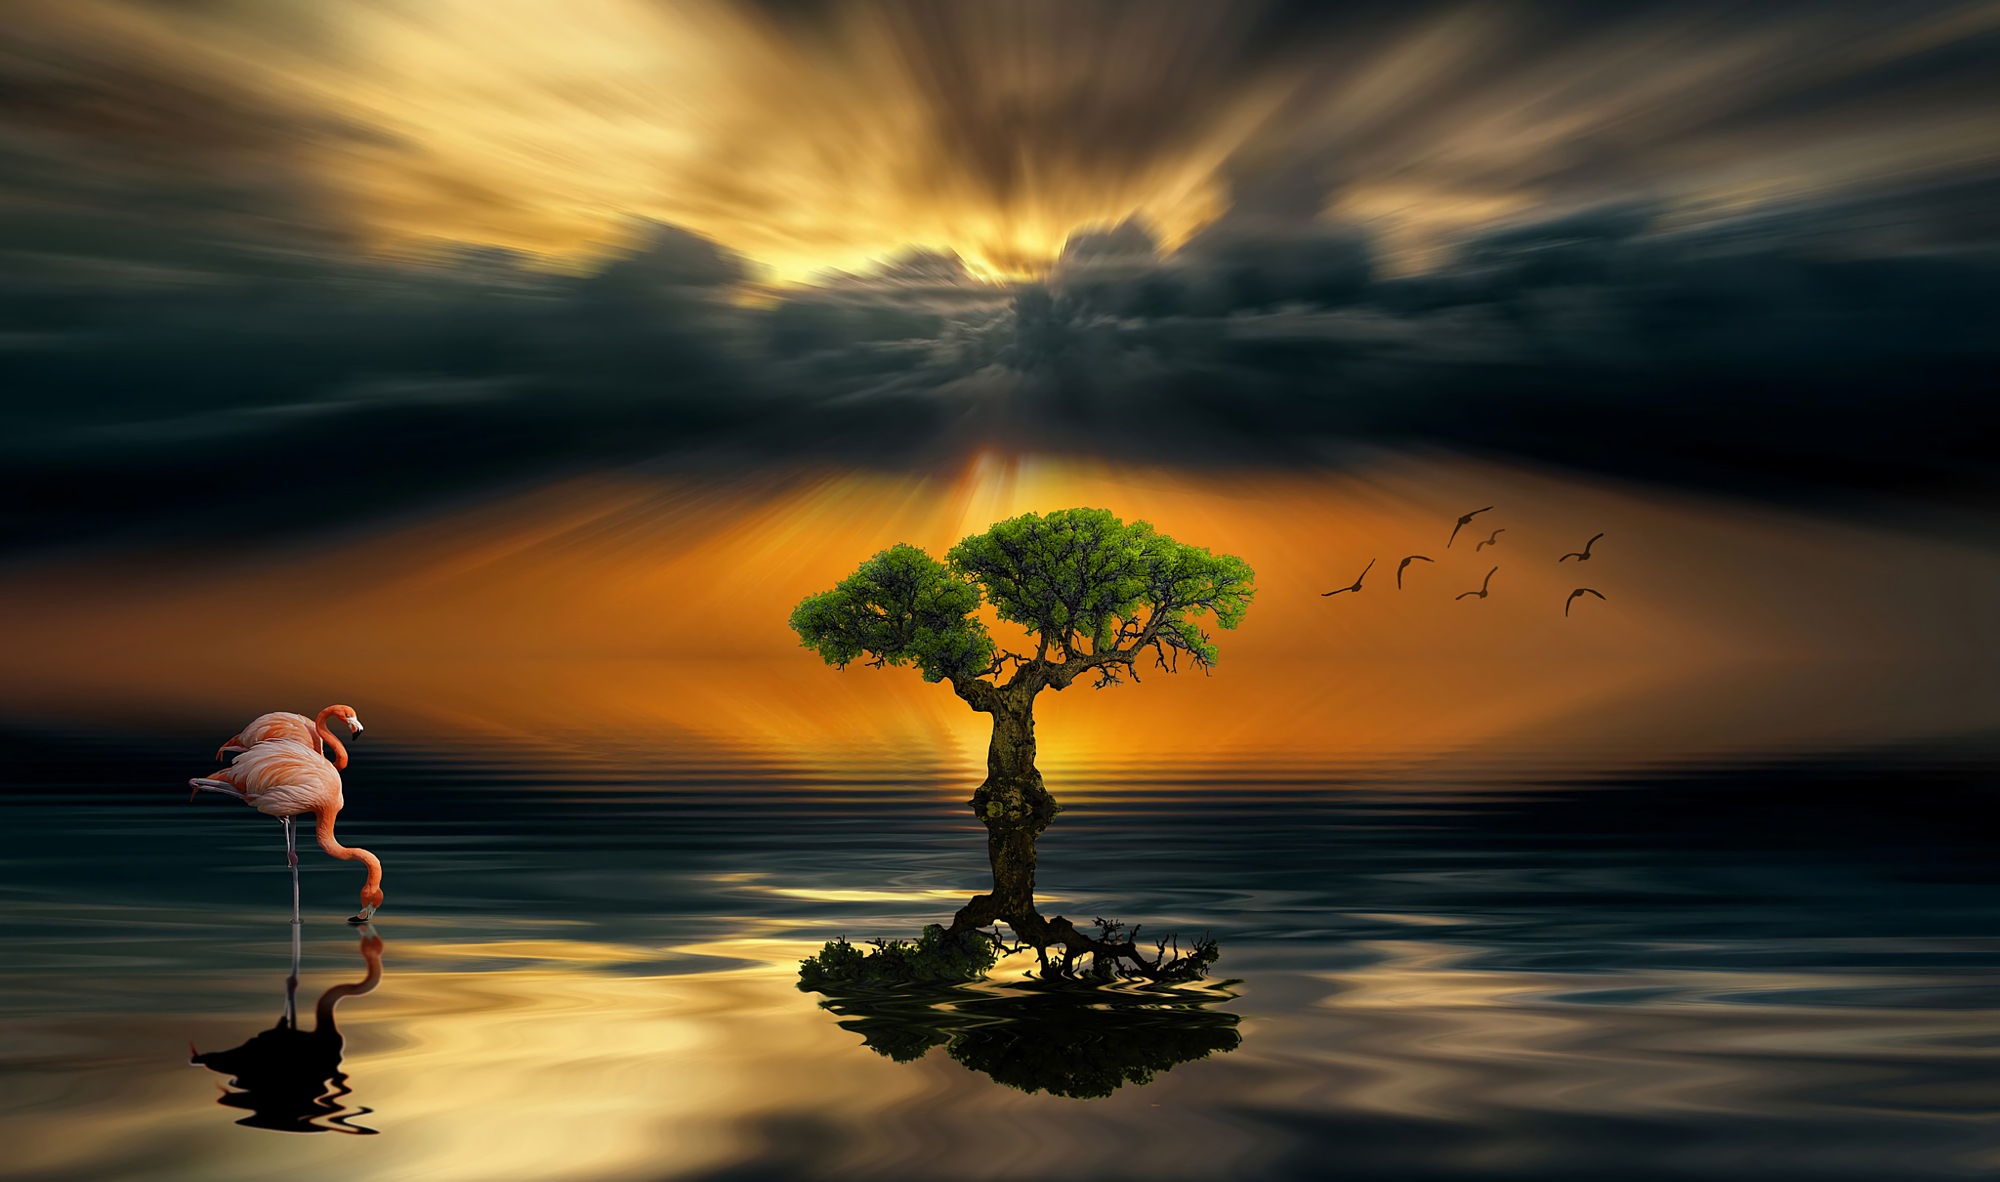 Tree and Flamingos Sunset Reflection by Nasser Osman